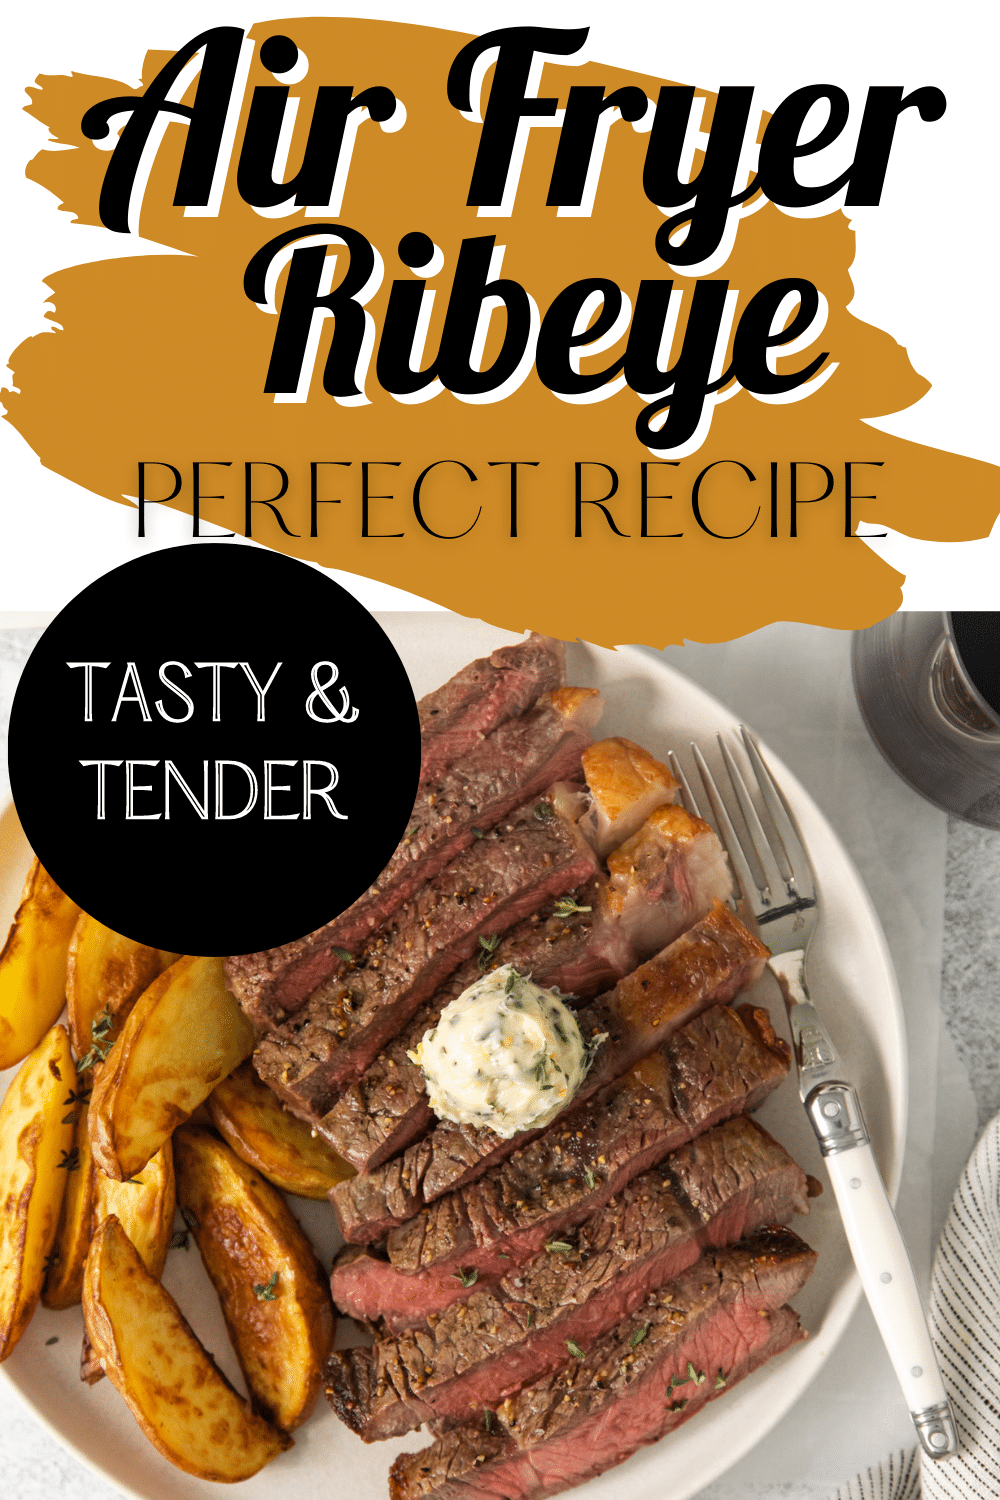 a dinner plate of sliced ribeye and potato wedges. Text overlay says "air fryer ribeye, perfect recipe, tasty and tender" via @vegetarianmamma